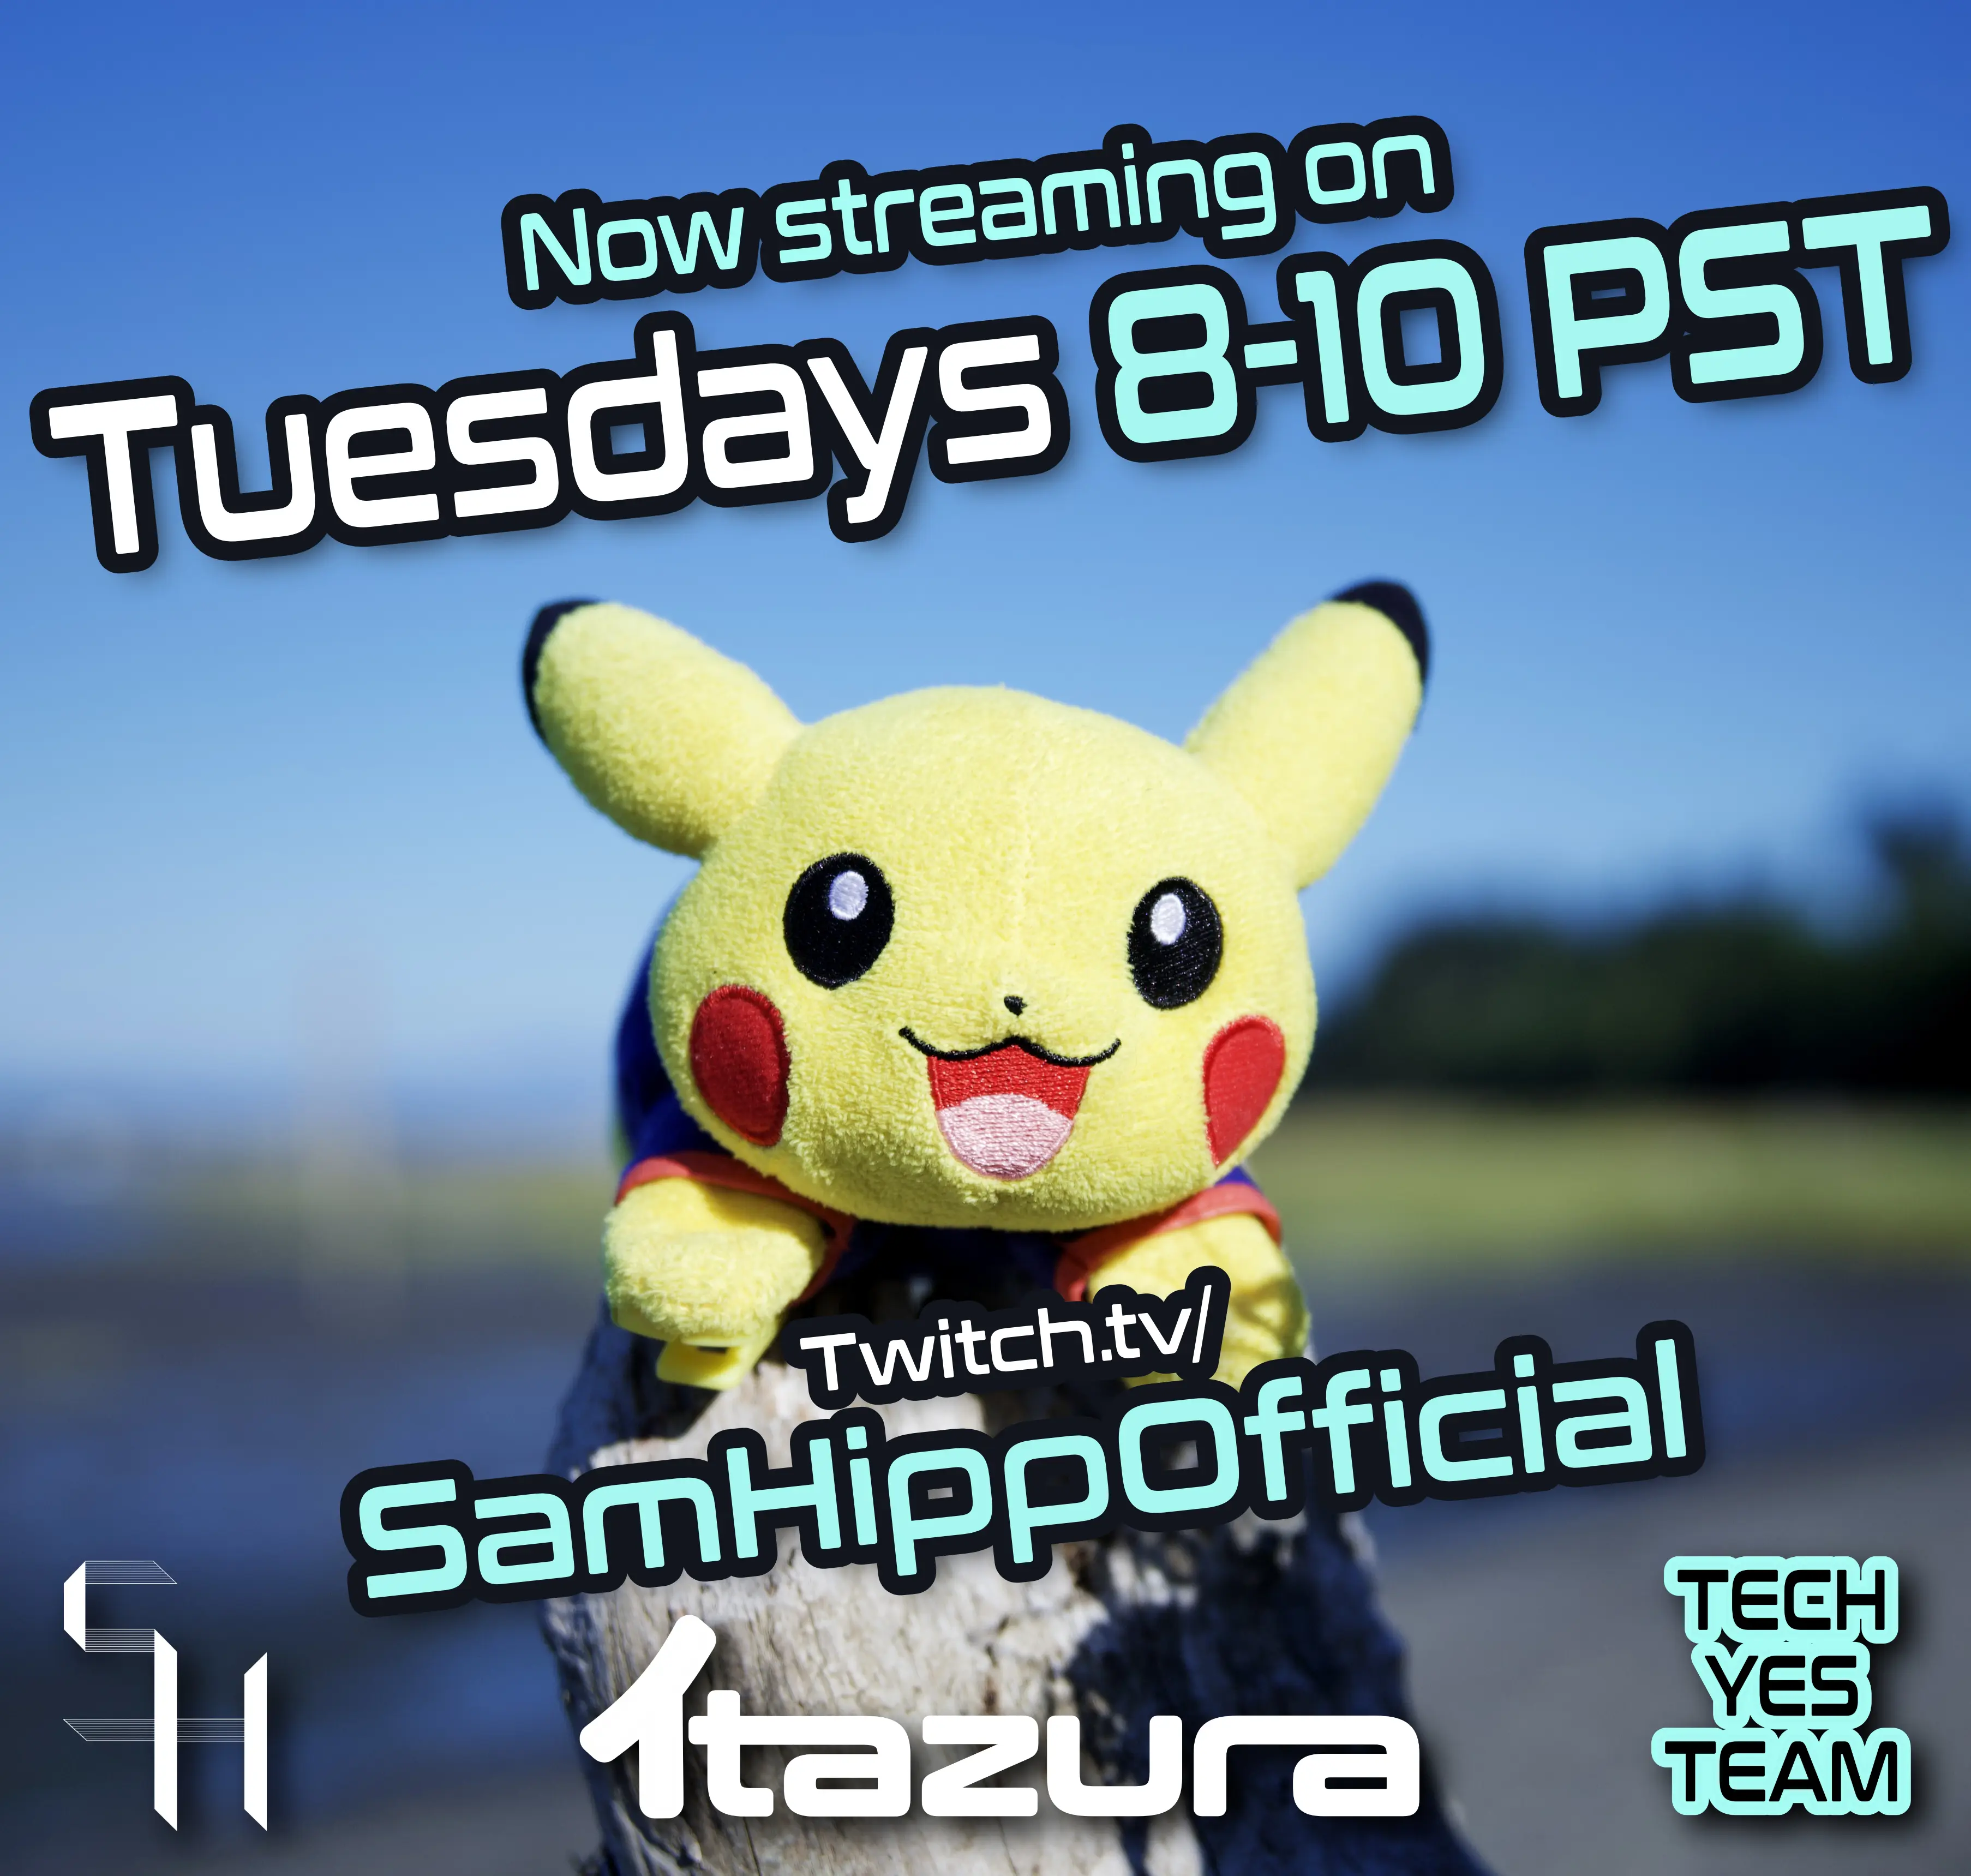 Join us on Tuesdays on Twitch!